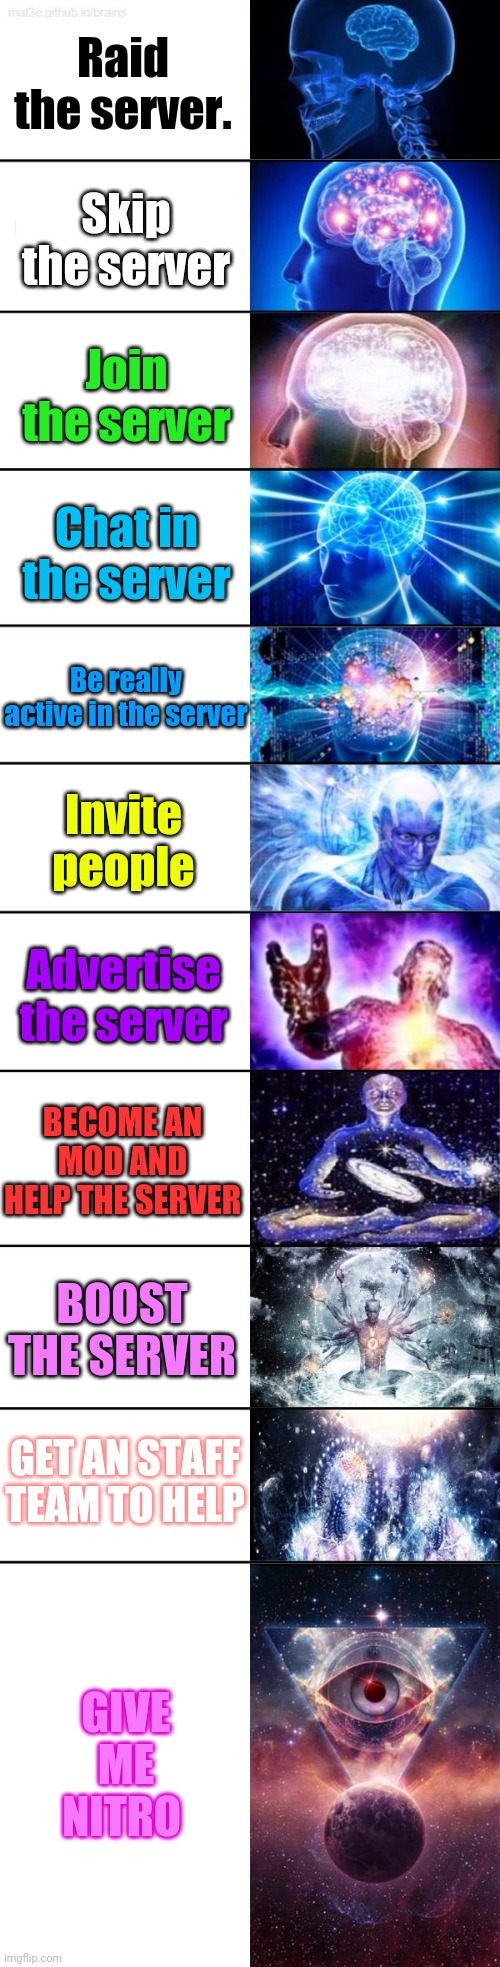 Discord server invite meme | Raid the server. Skip the server; Join the server; Chat in the server; Be really active in the server; Invite people; Advertise the server; BECOME AN MOD AND HELP THE SERVER; BOOST THE SERVER; GET AN STAFF TEAM TO HELP; GIVE ME NITRO | image tagged in discord | made w/ Imgflip meme maker